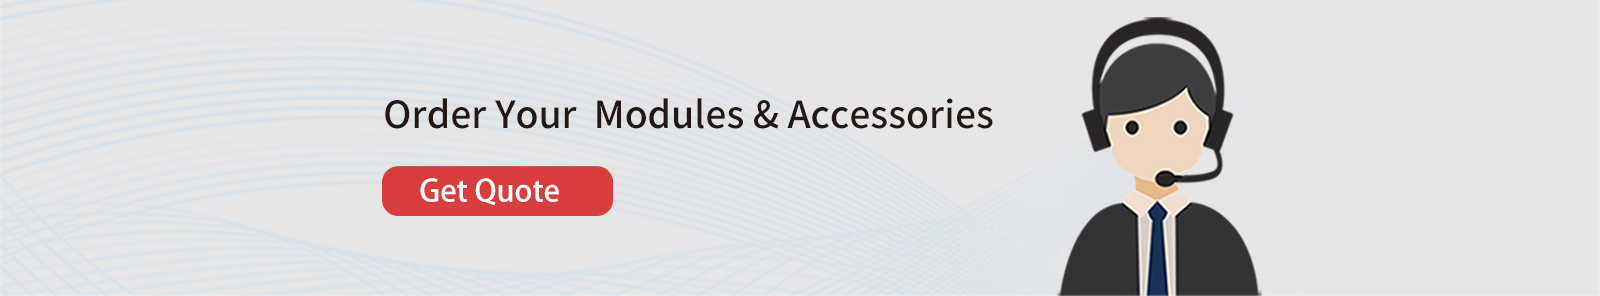 Order your module and accessories